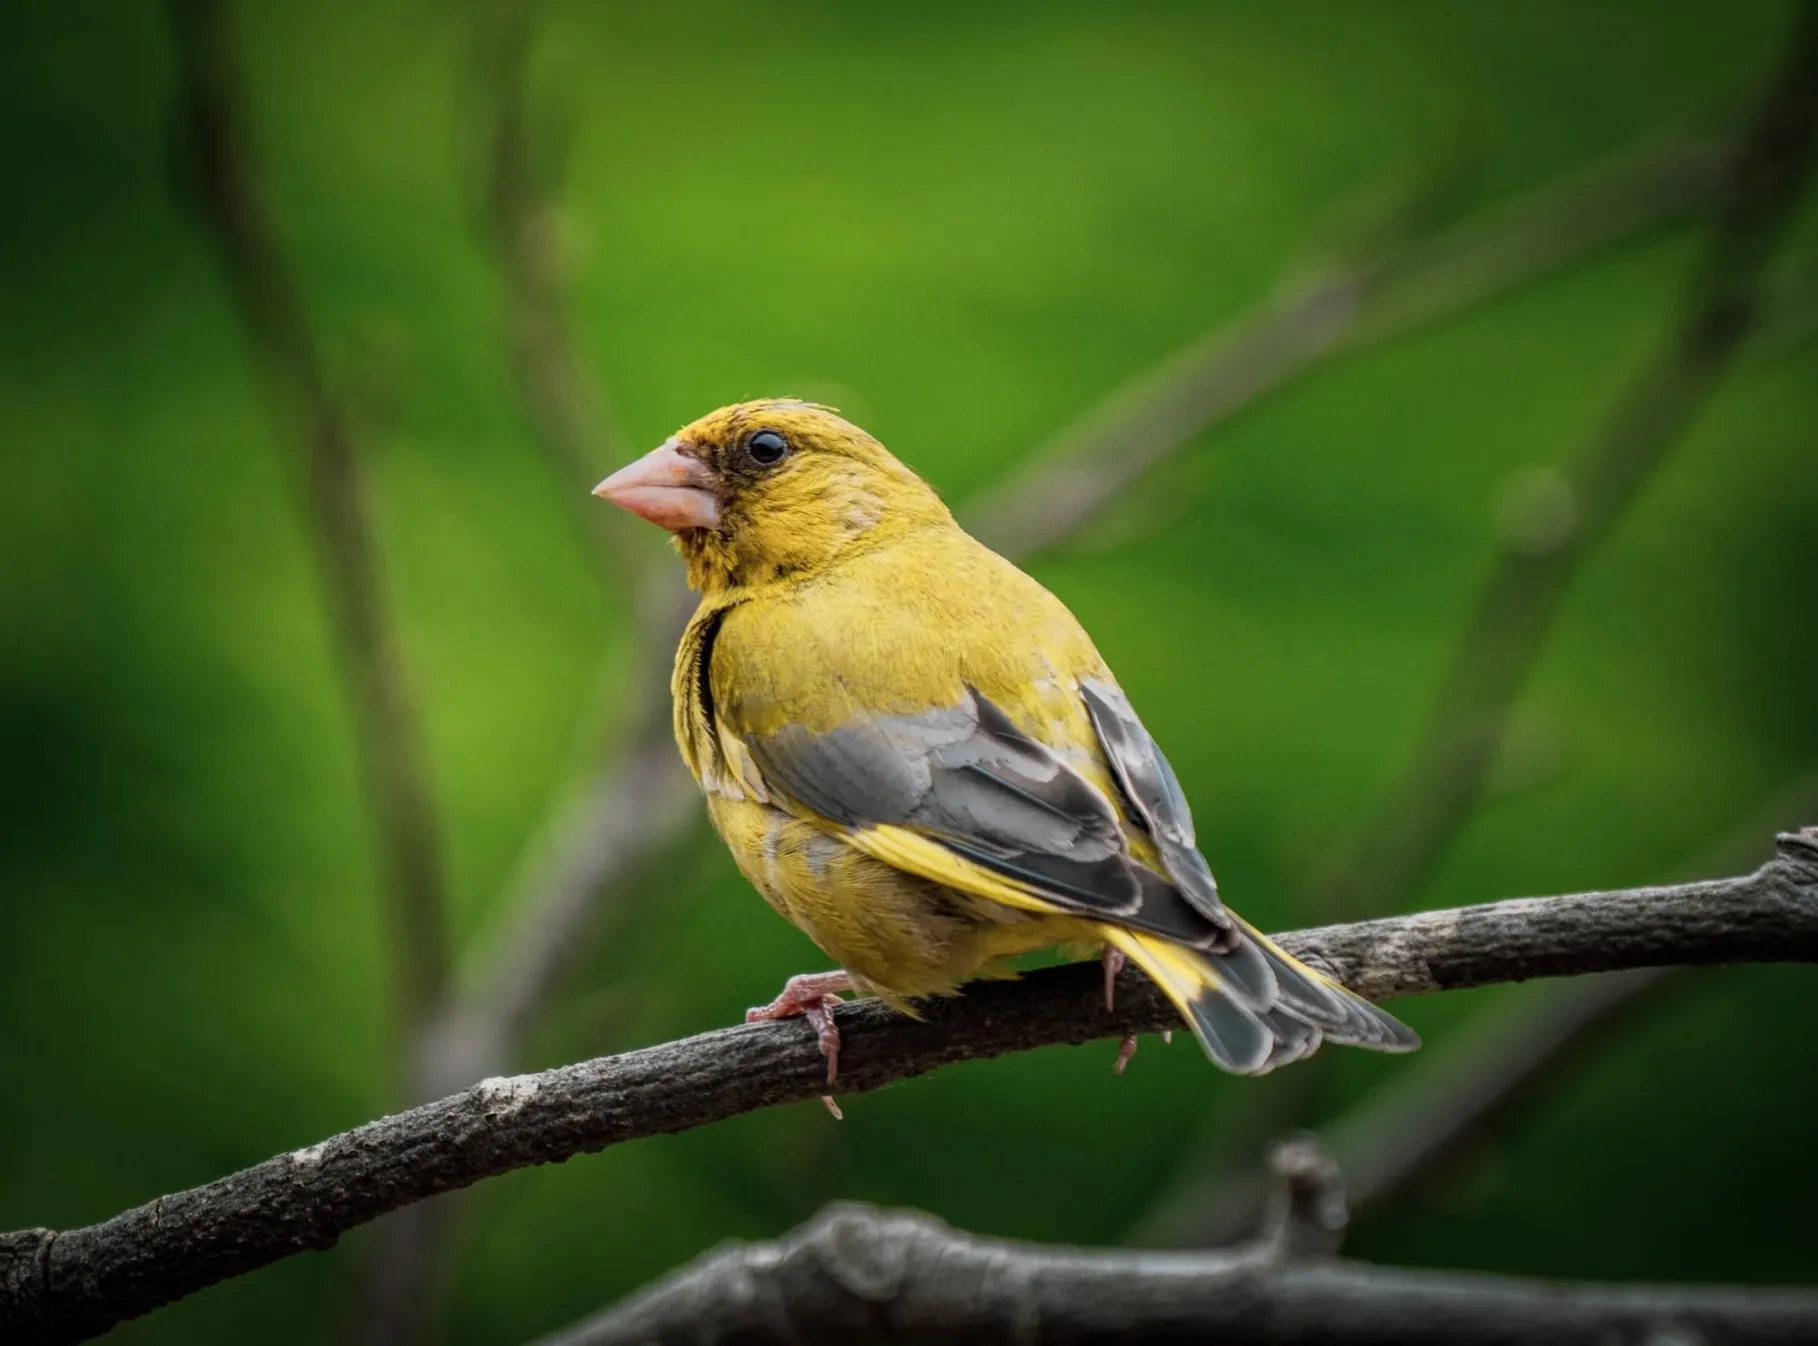 A small, neat bird, sits gripping the rough bark of a twig with tiny, scaly pink claws. The small triangular beak is the same colour. A dark eye watches the photographer from a slighted fluffed up yellow feathers, with grey markings on the wings and tail feathers. 